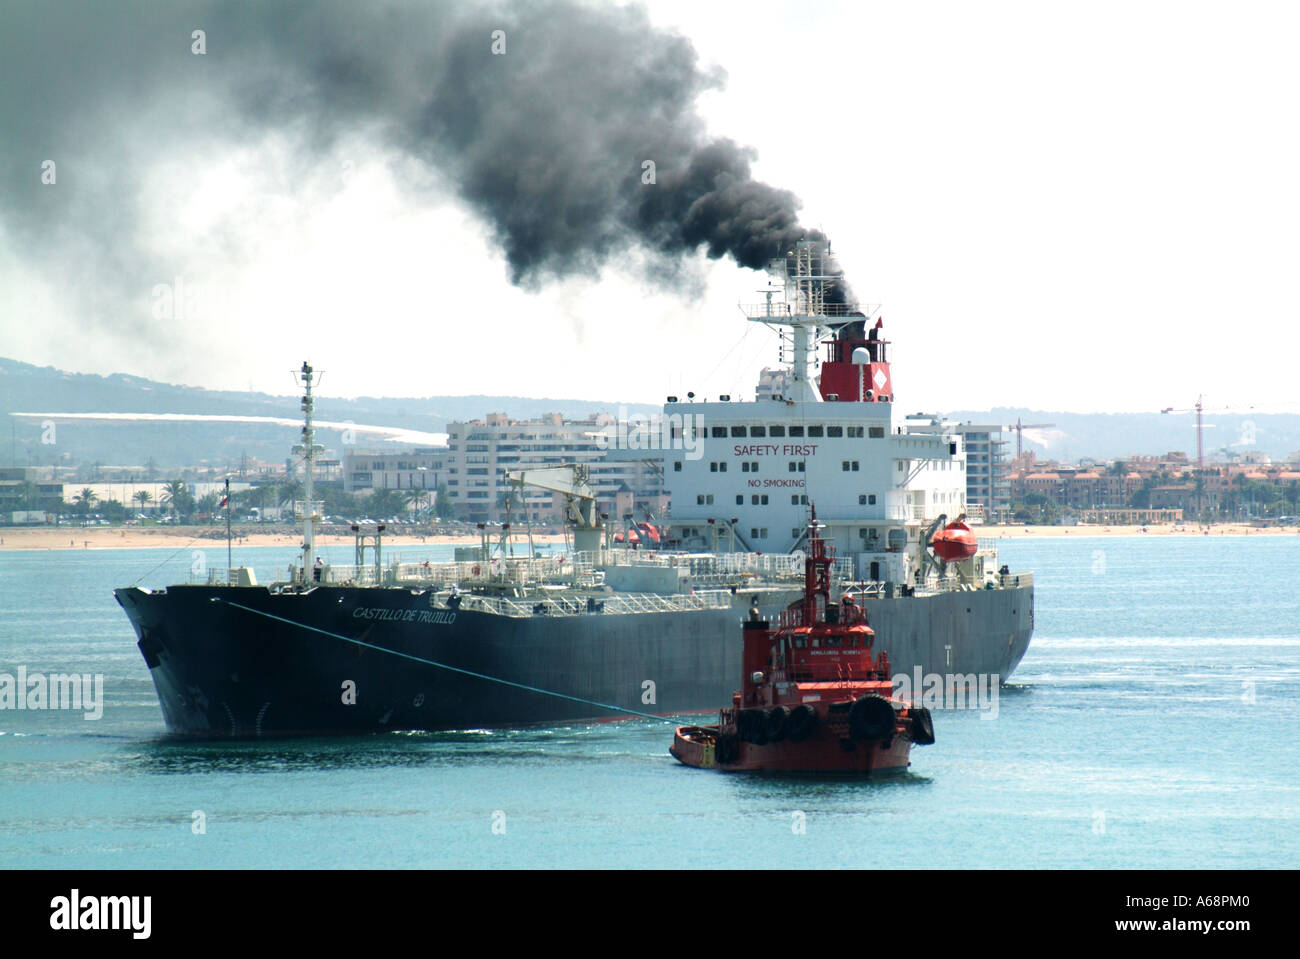 Black smoke & soot emissions belching out  from cargo ship funnel polluting local atmosphere & environment arriving at Port of Palma Mallorca Spain EU Stock Photo